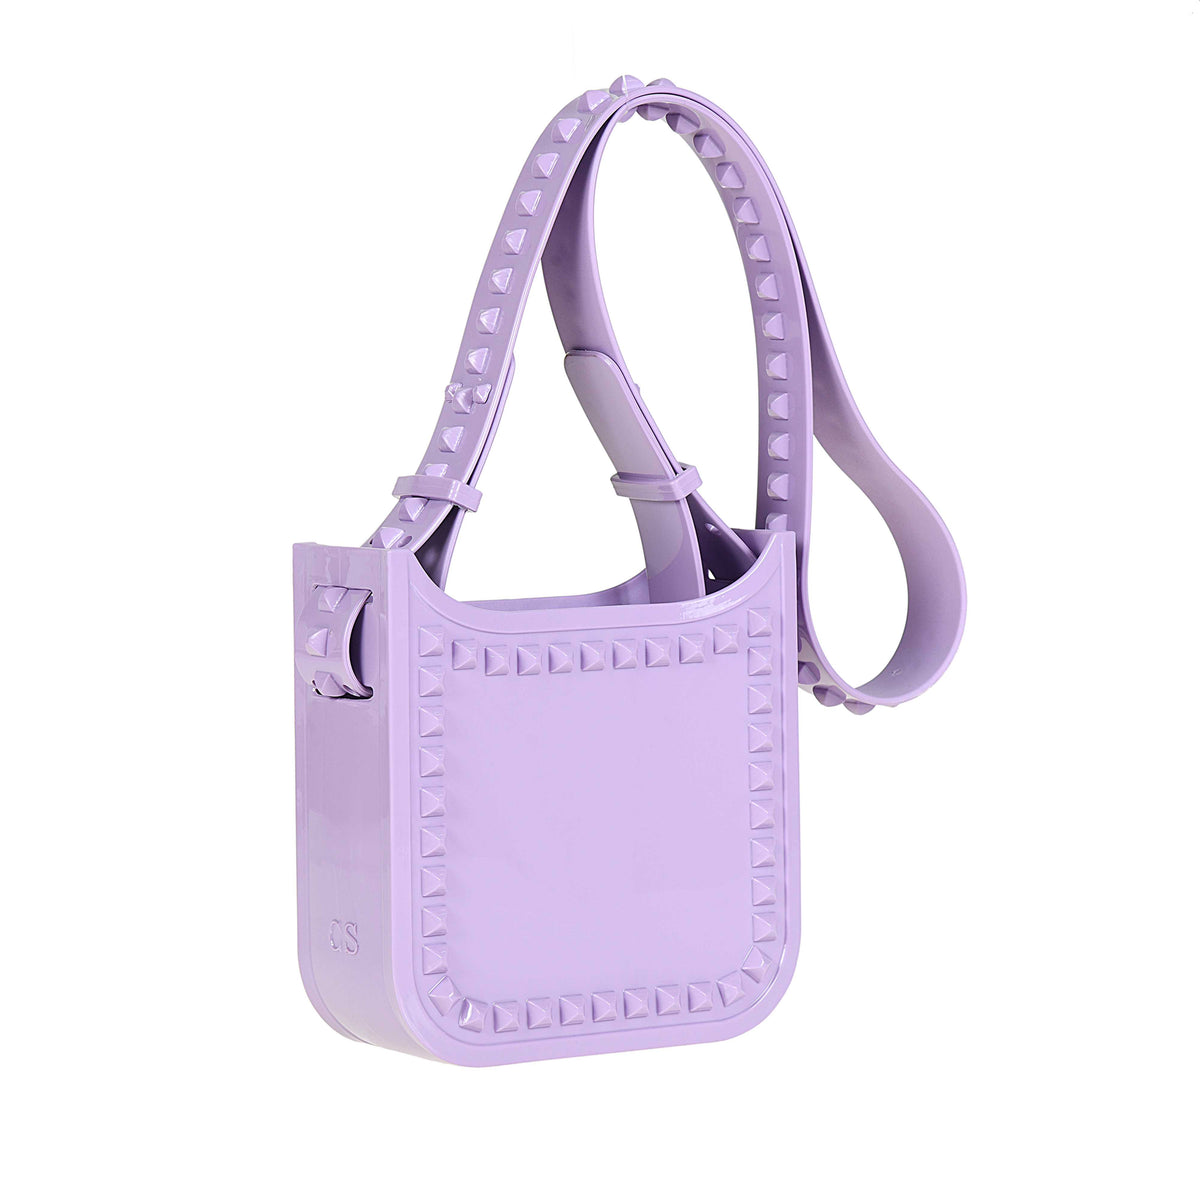 Lisa small studded crossbody beach purse in color violet